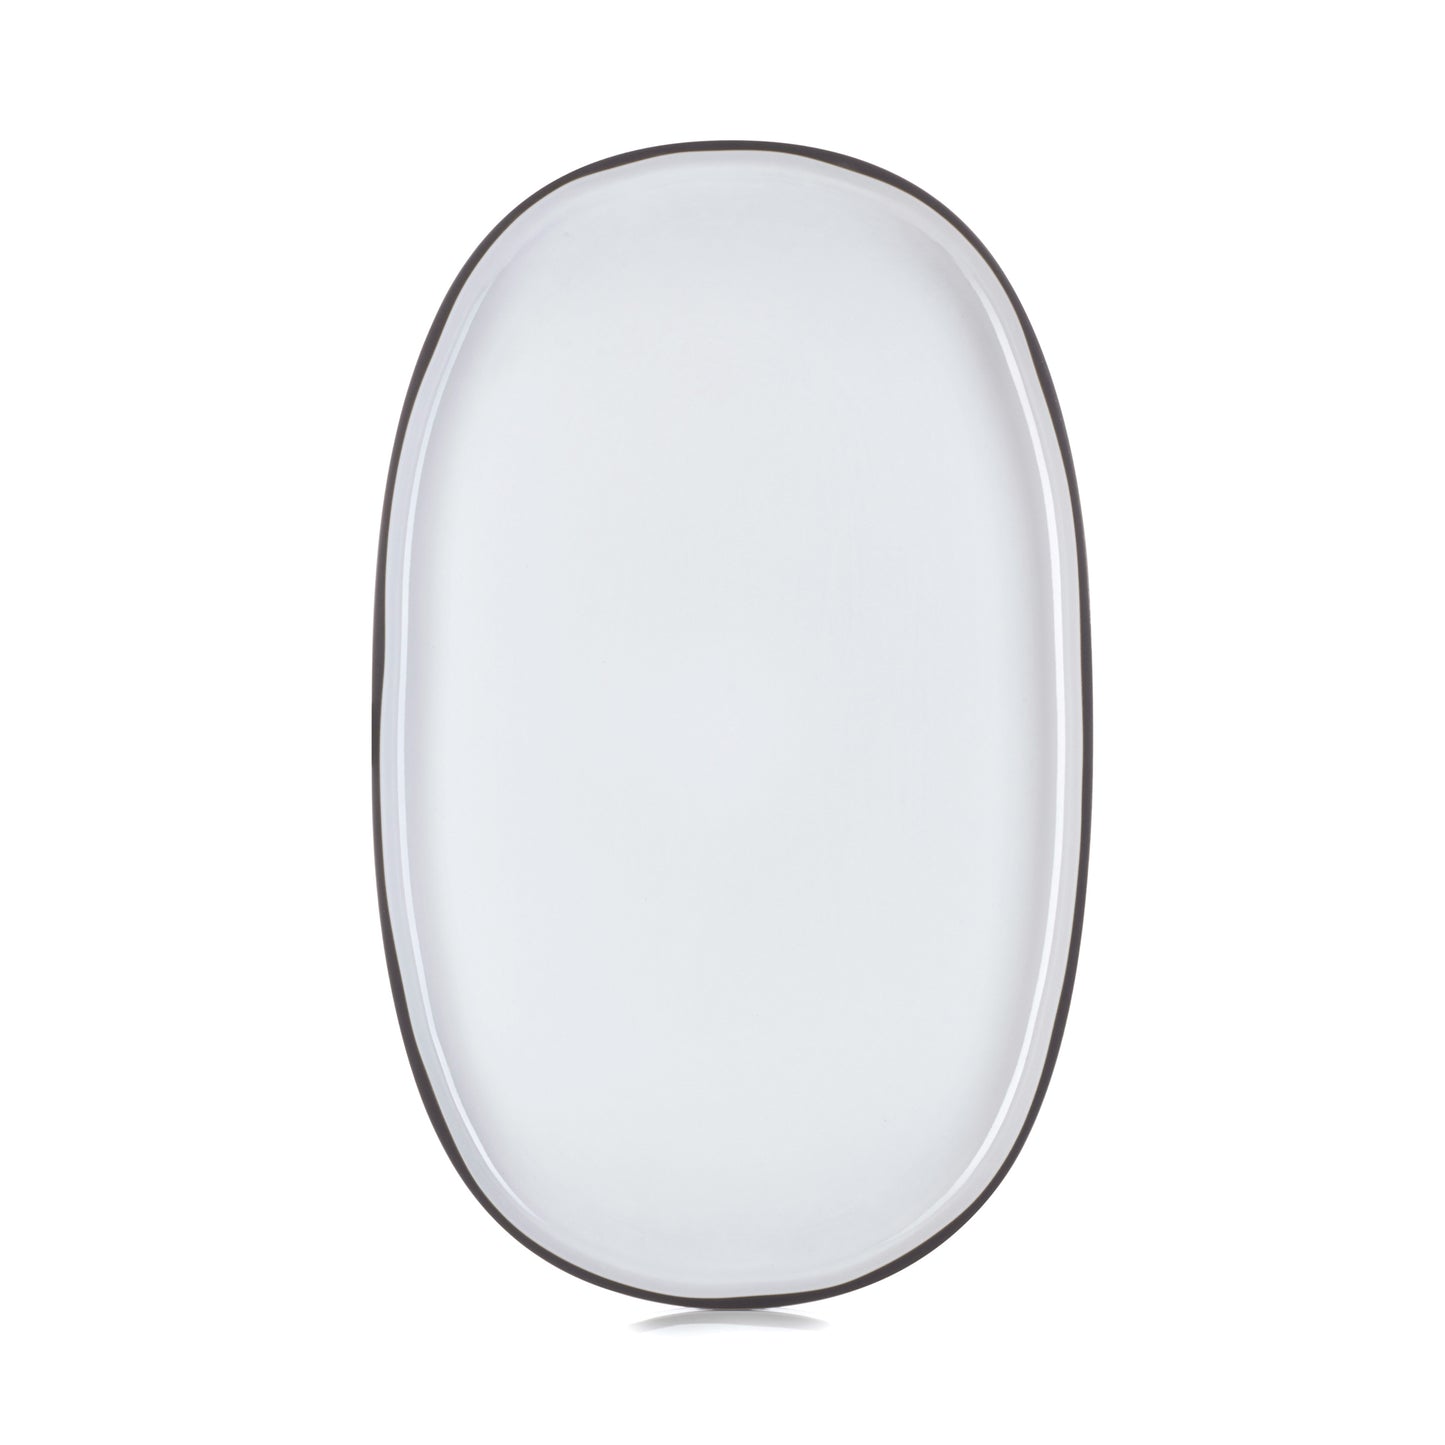 CARACTERE 46CM LARGE OVAL DISH - WHITE